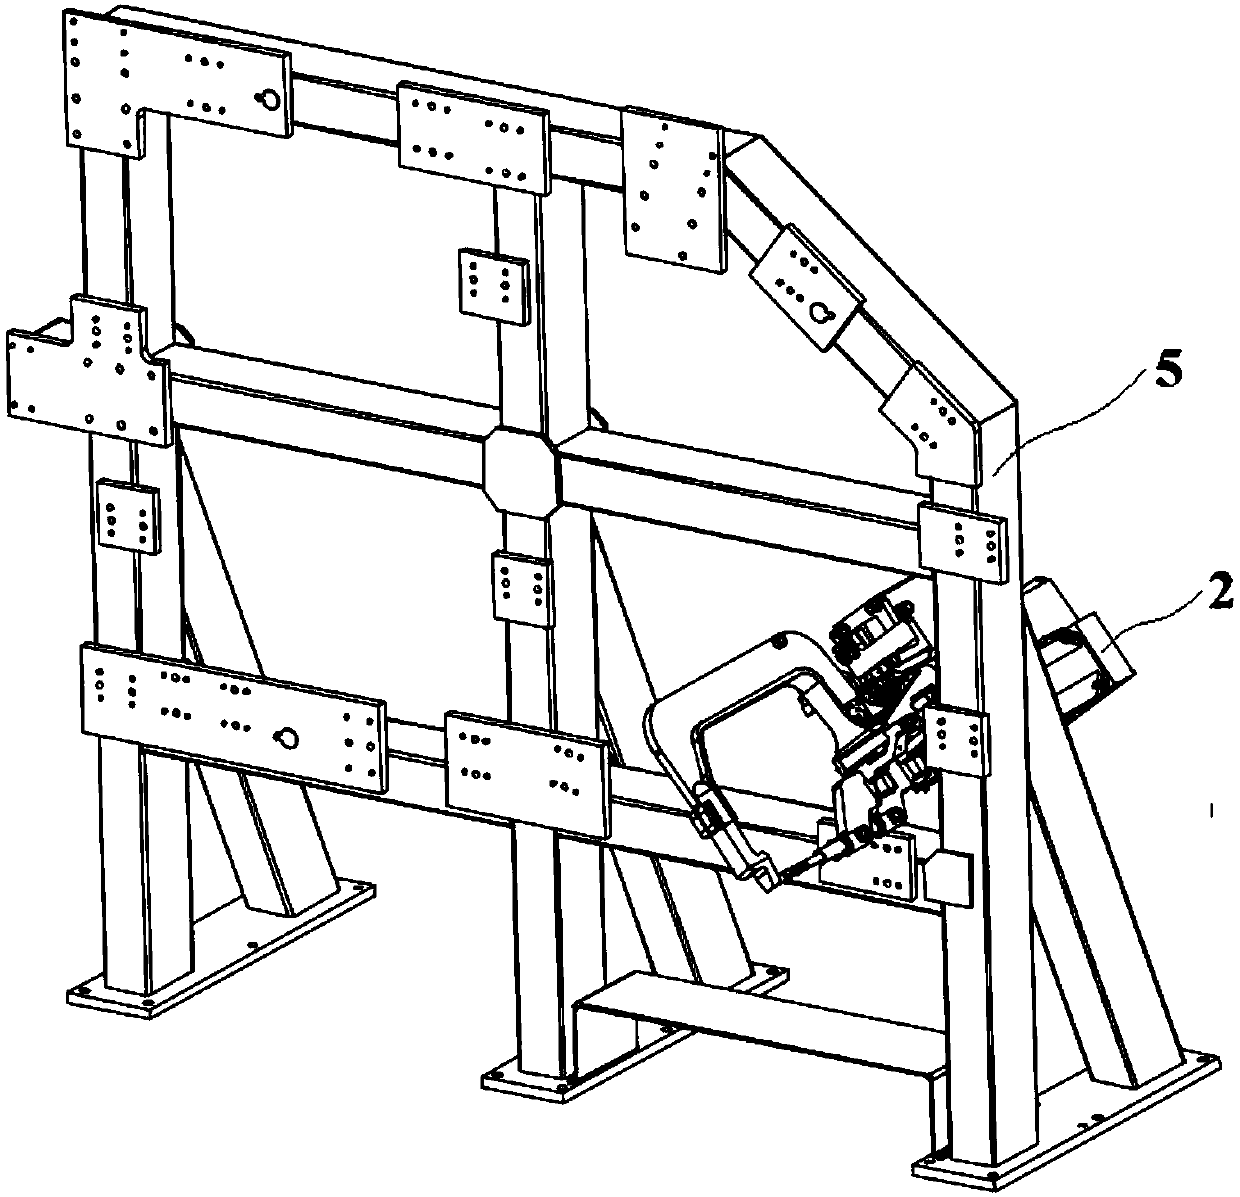 Mechanism for using puppet welding on welding occasion